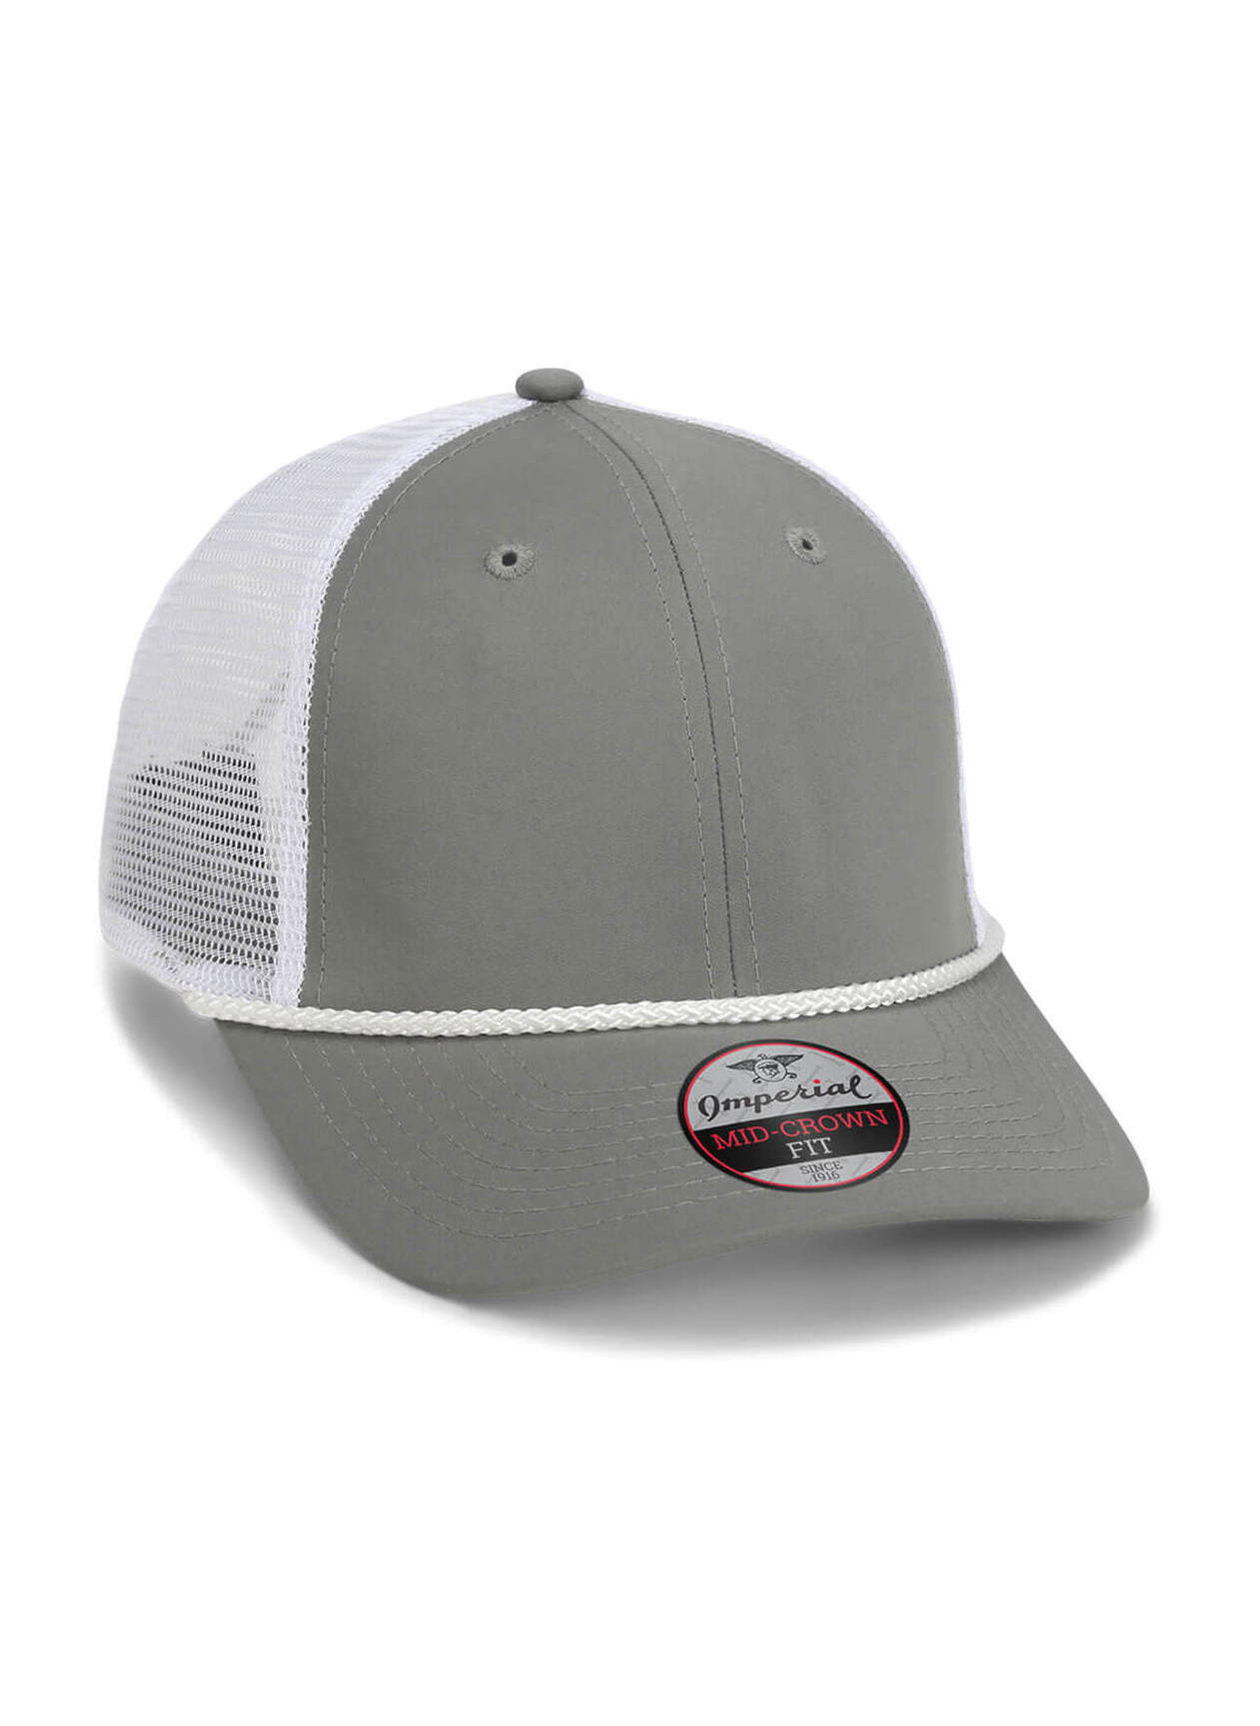 Imperial Grey / White The Night Owl Mesh Back Performance Hat